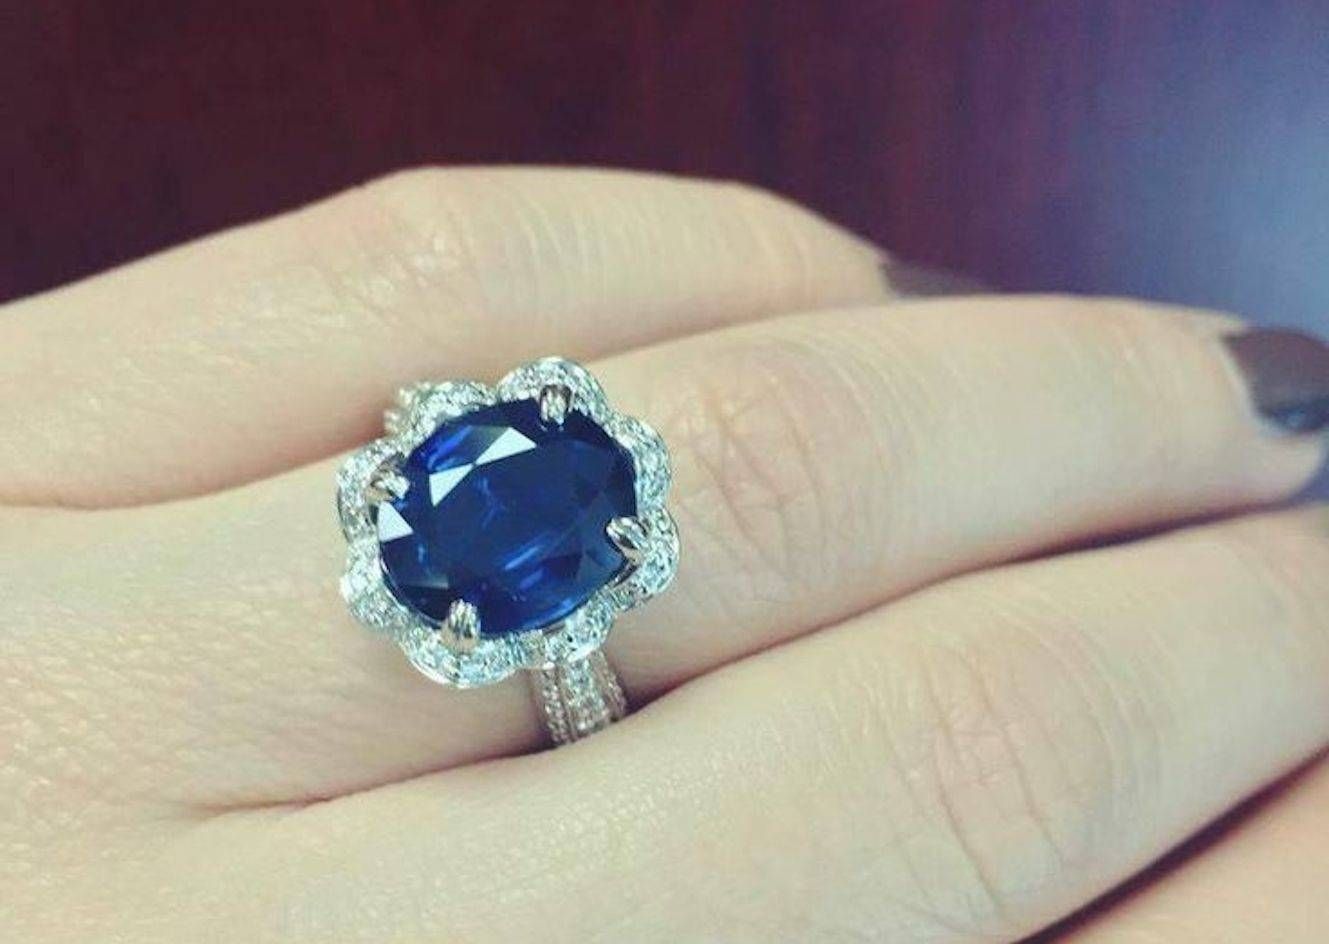 How To Choose A Sapphire Engagement Ring | Ritani Intended For Engagement Rings Sapphires (View 3 of 15)